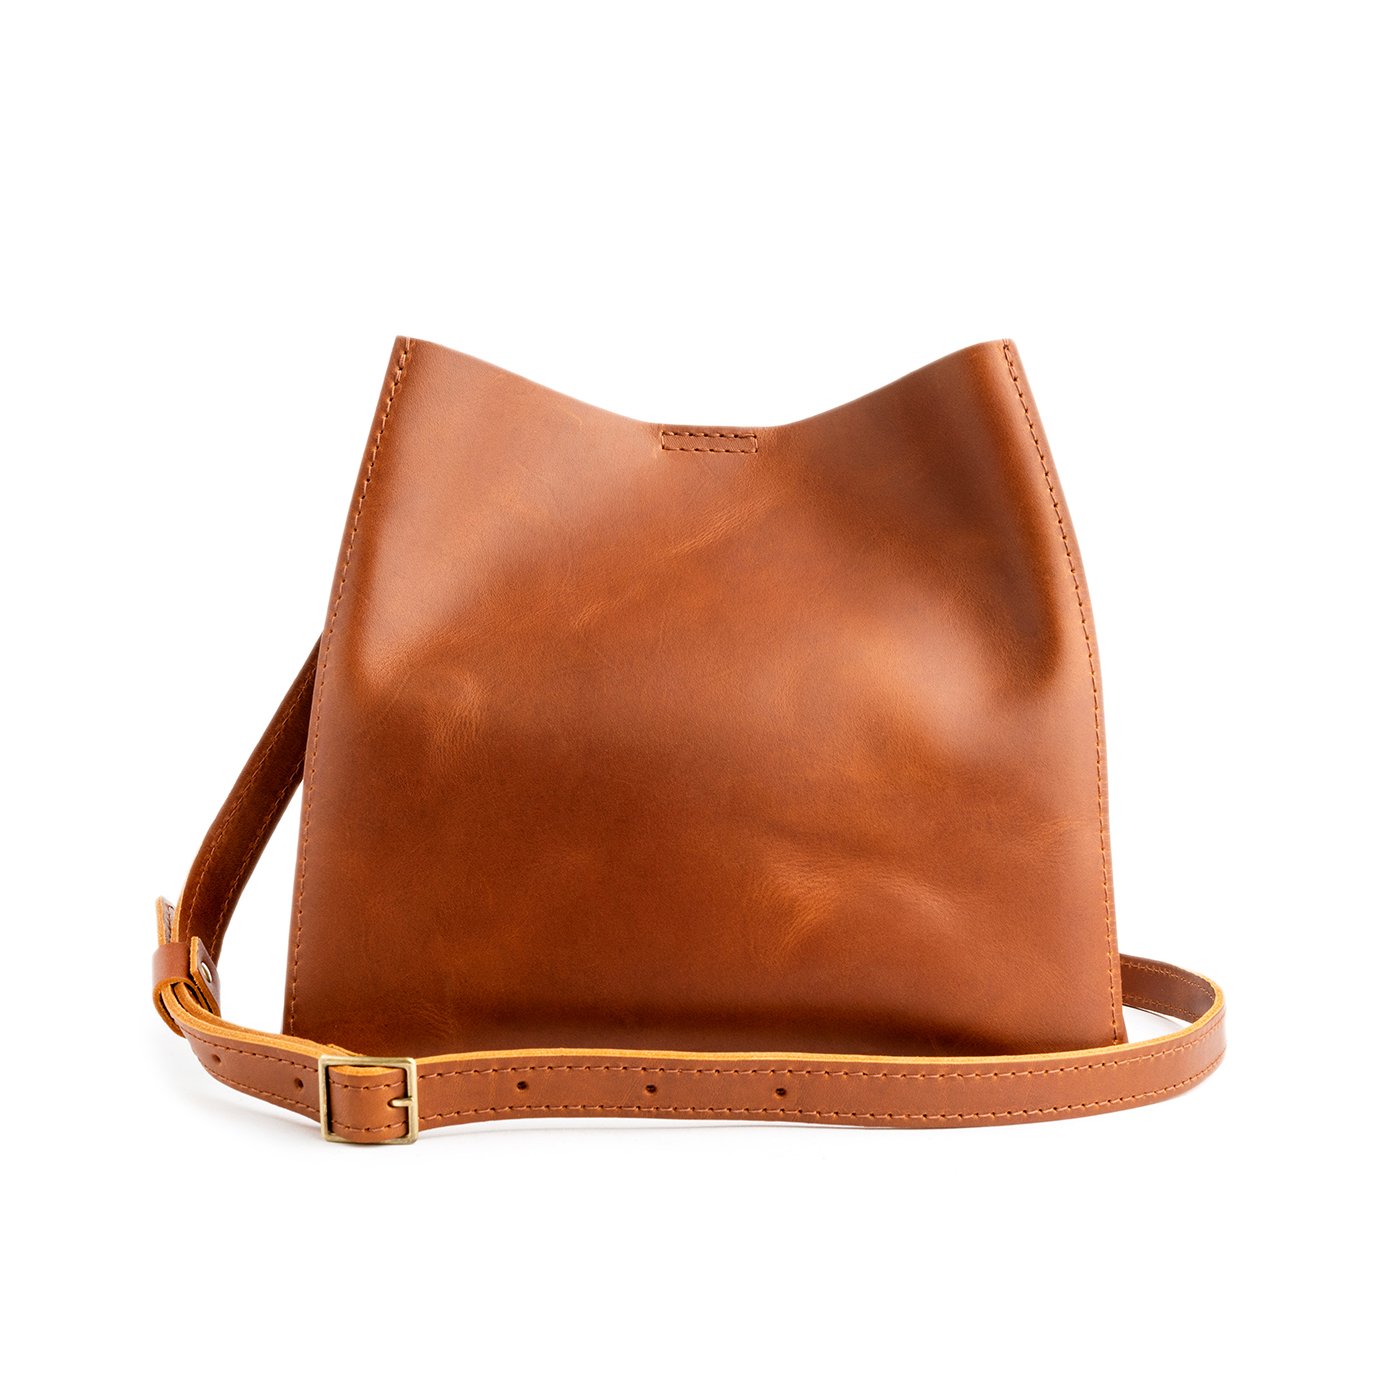 All About It Bucket Bag